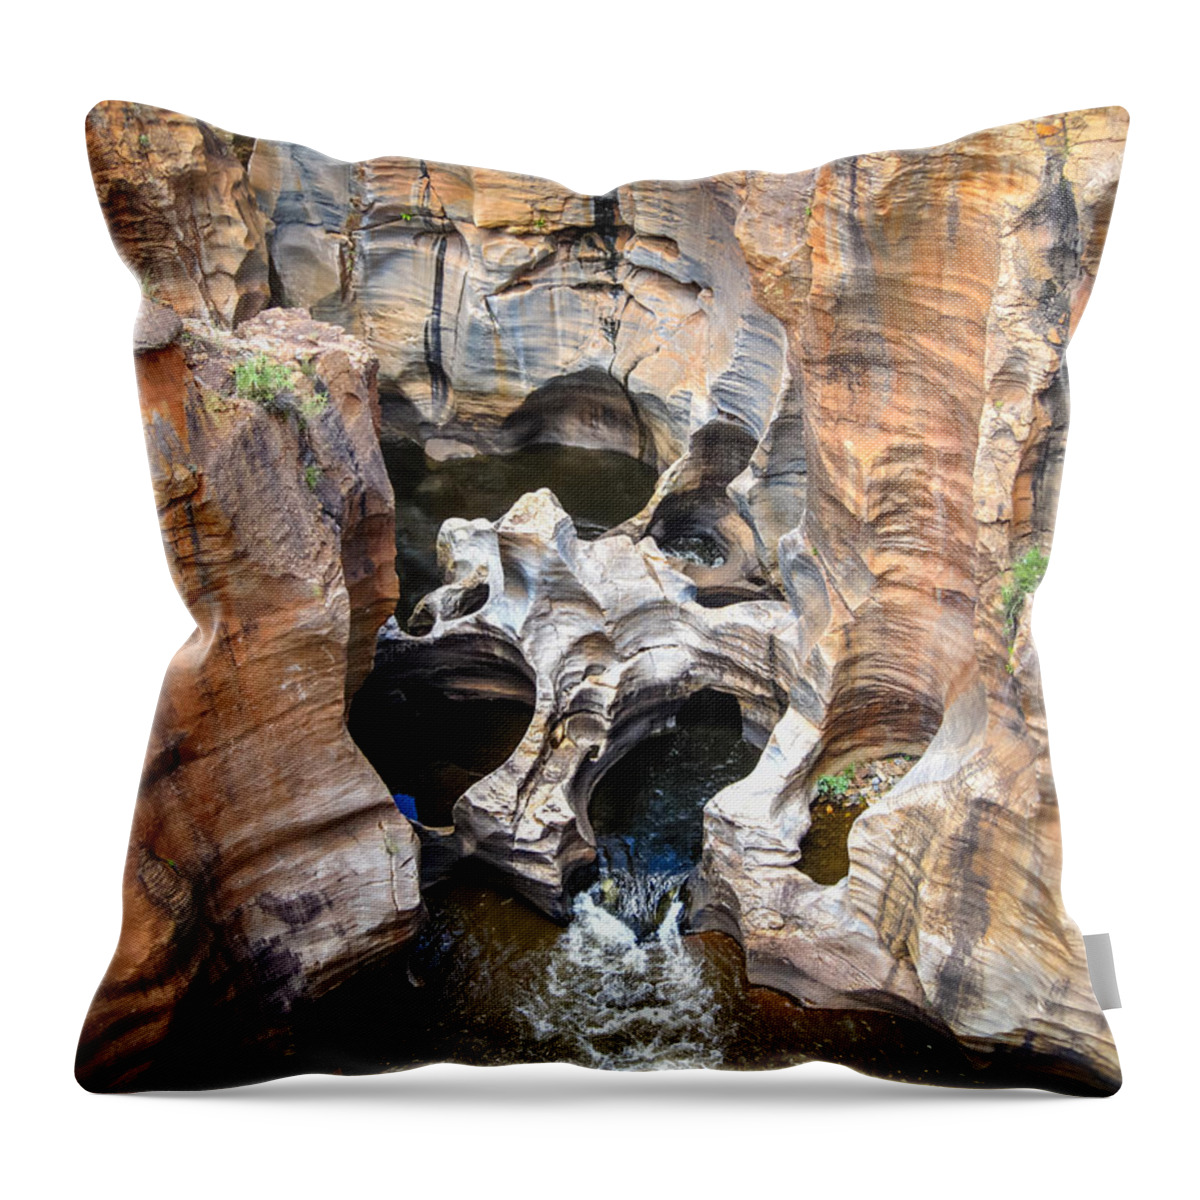 100217 Rep South Africa Expedition Throw Pillow featuring the photograph Bourke's Luck Potholes by Gregory Daley MPSA